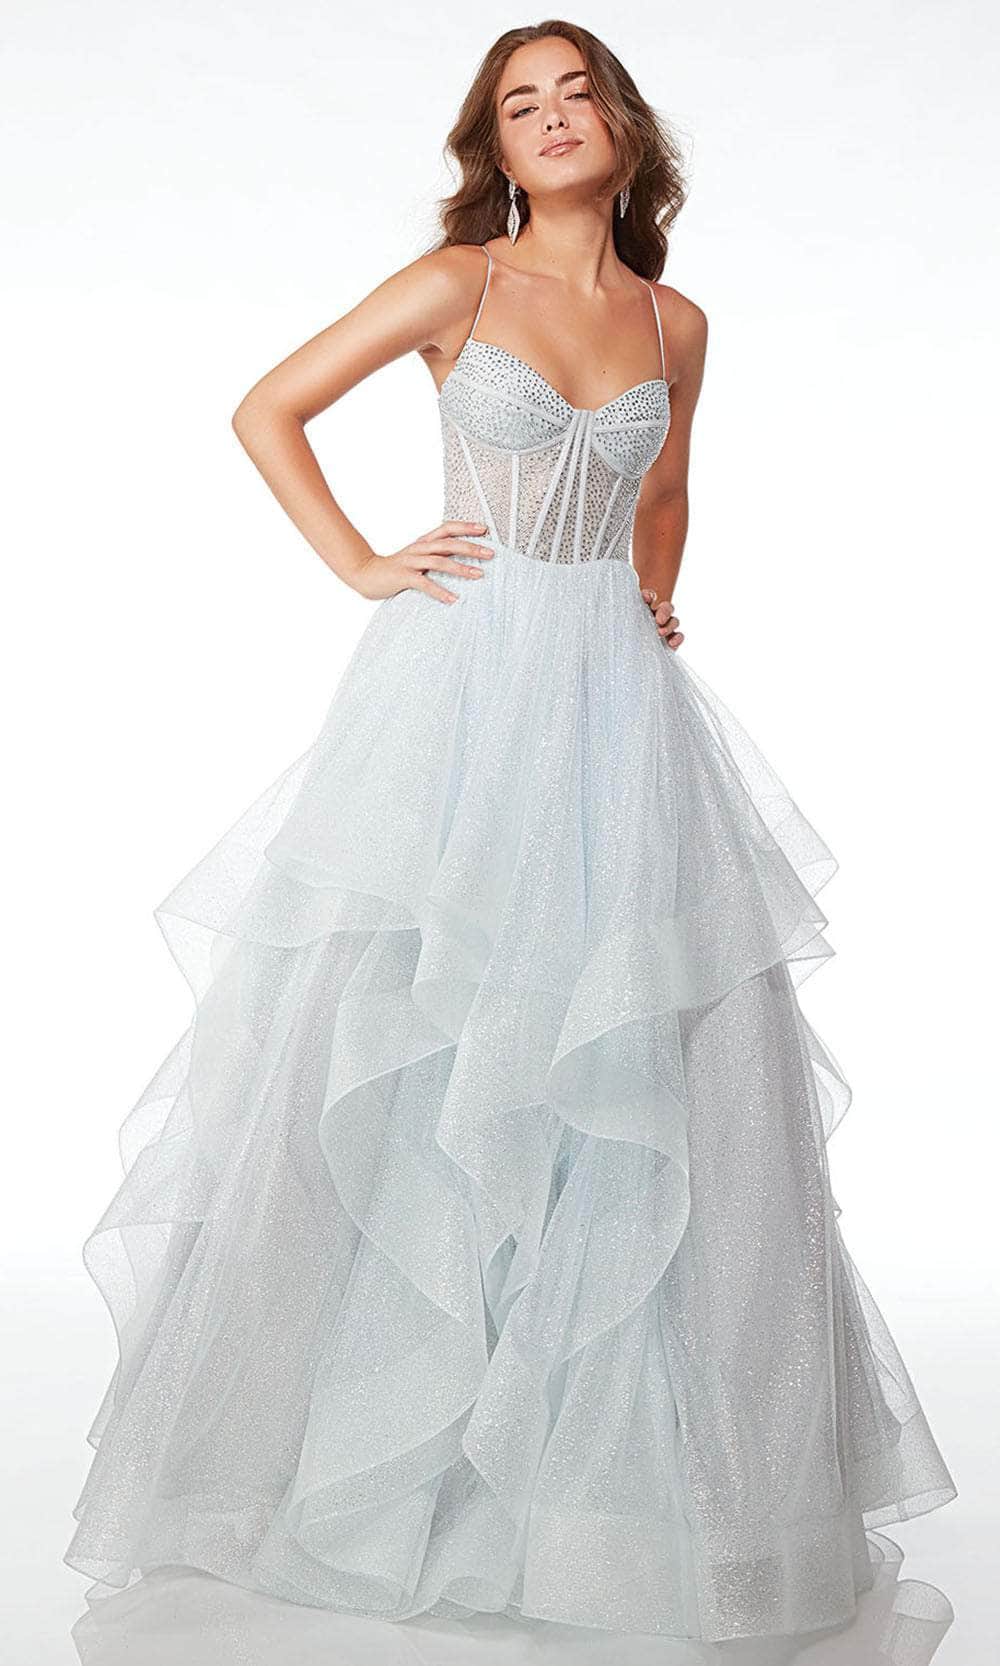 Alyce Paris 61637 - Tiered A-Line Prom Dress Special Occasion Dress 000 / Silver Lake